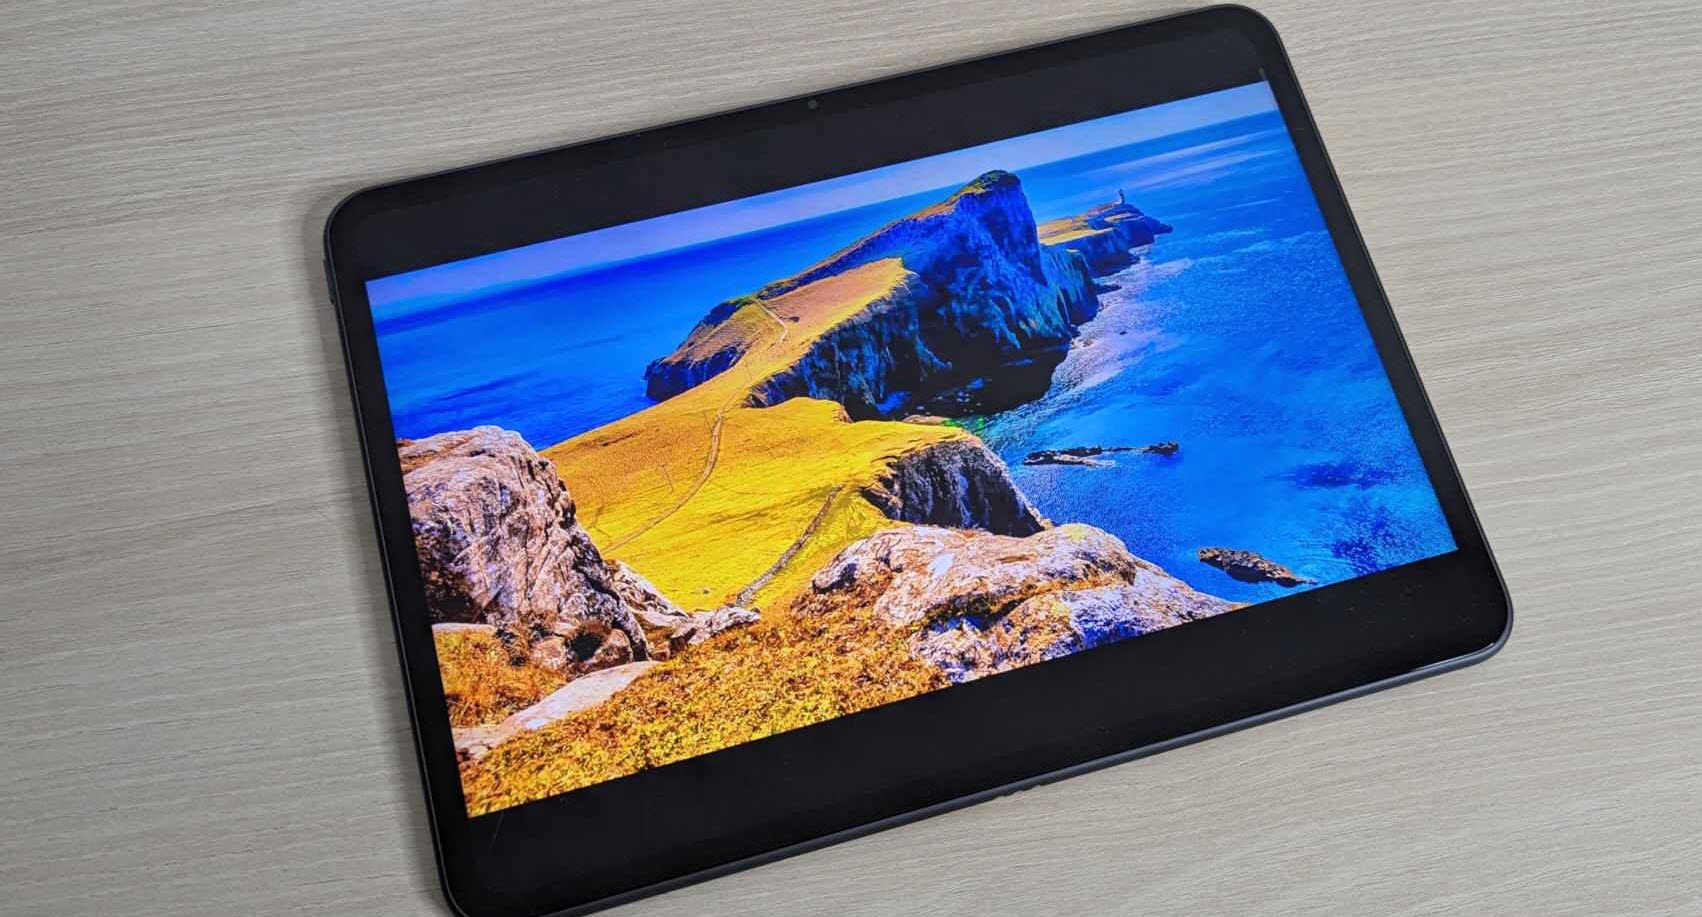 Is Oppo Pad 2 the most affordable tablet? - Quora